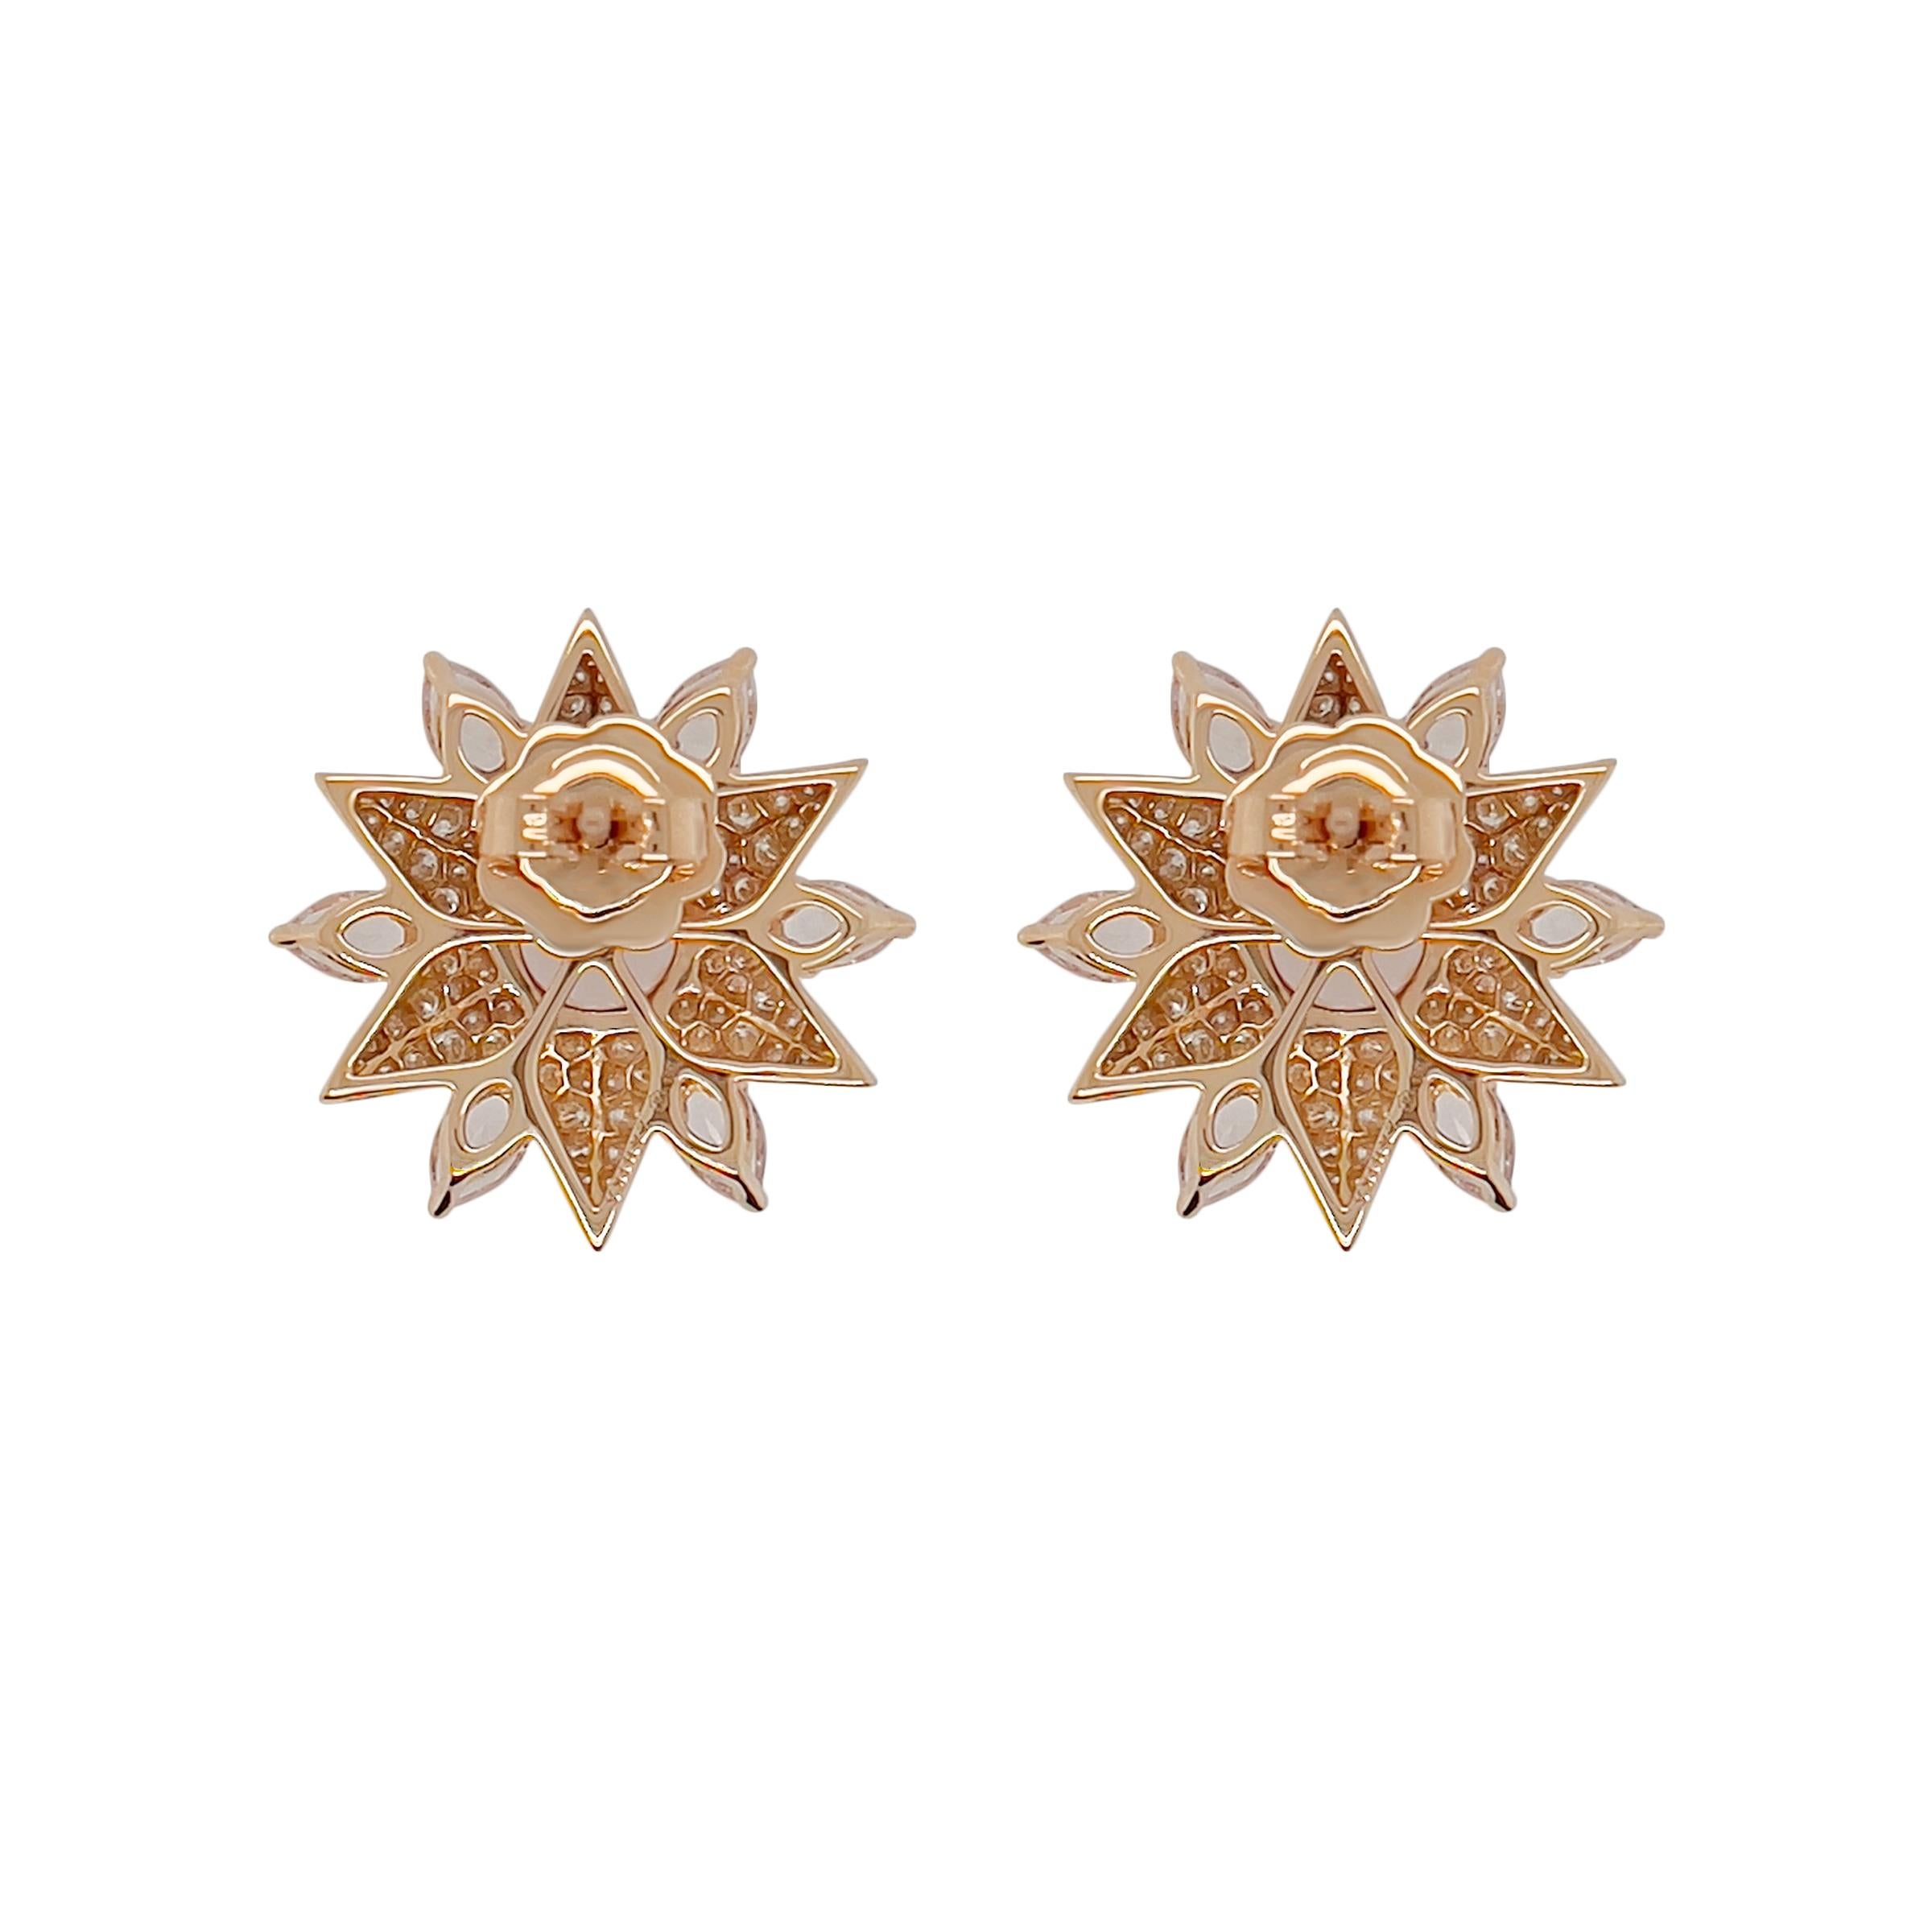 Simple and sweet elegance is the theme behind this pair of cluster earrings. A total of 4.22 carats of Morganite is surrounded by finely pave’d white vvs diamonds. Set in 18k pink gold, the earrings also display an intricate gallery on the back so